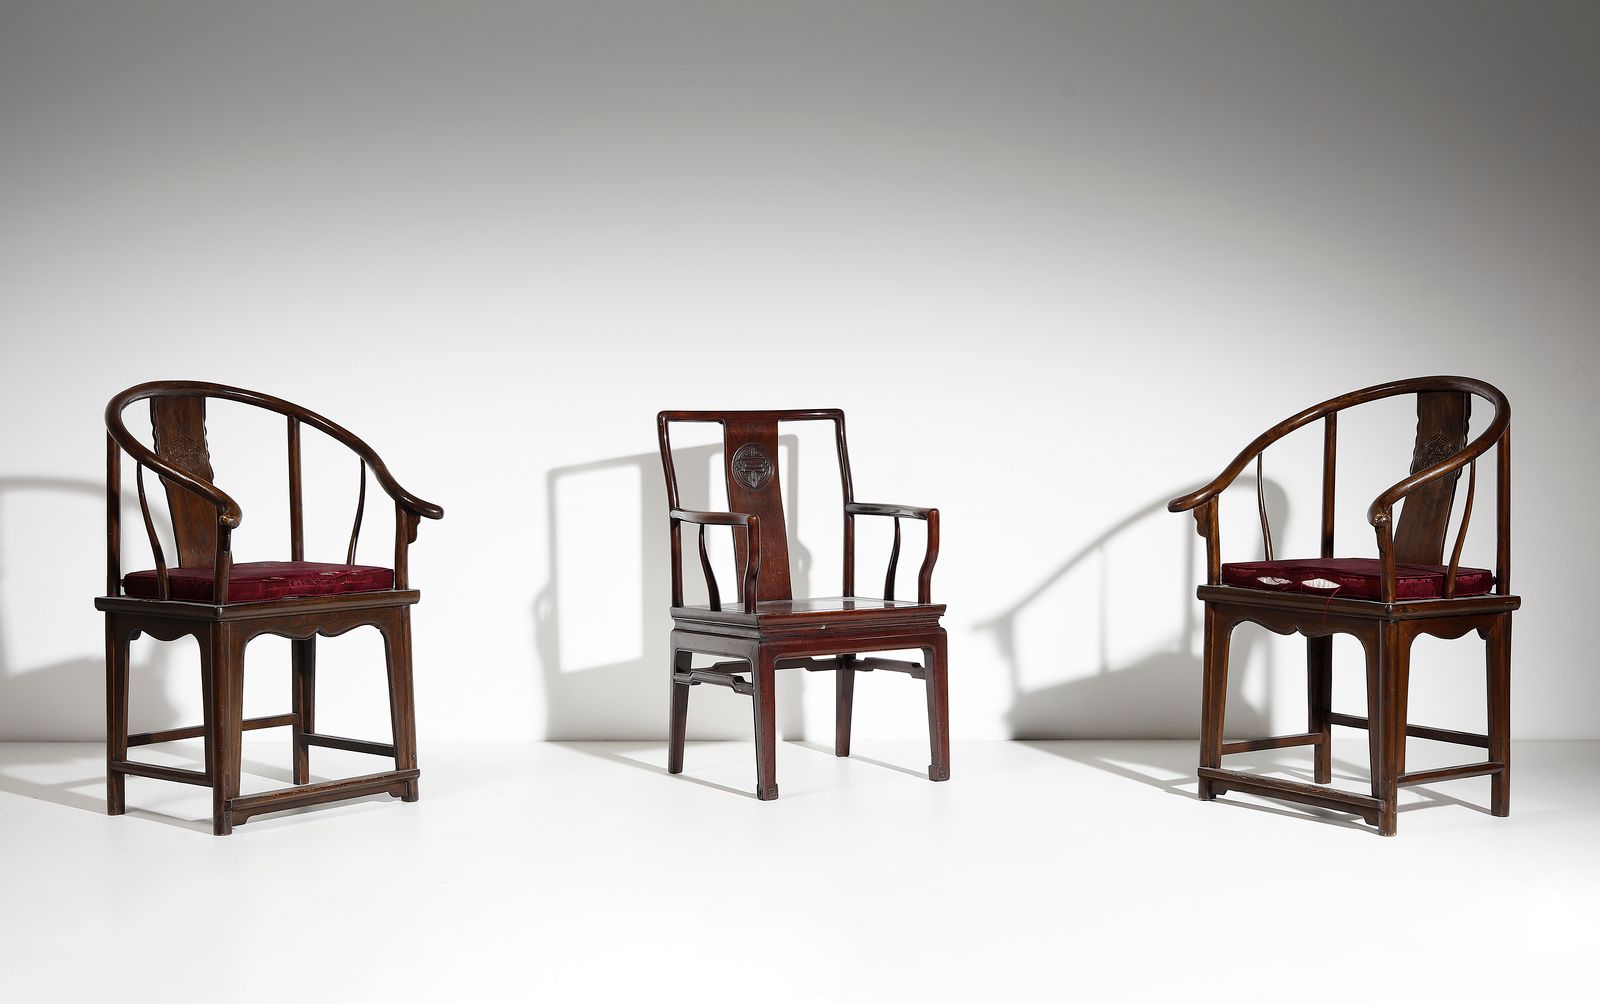 Chinese Art A group of three wooden armchairs Art chinois. Un groupe de trois fa&hellip;